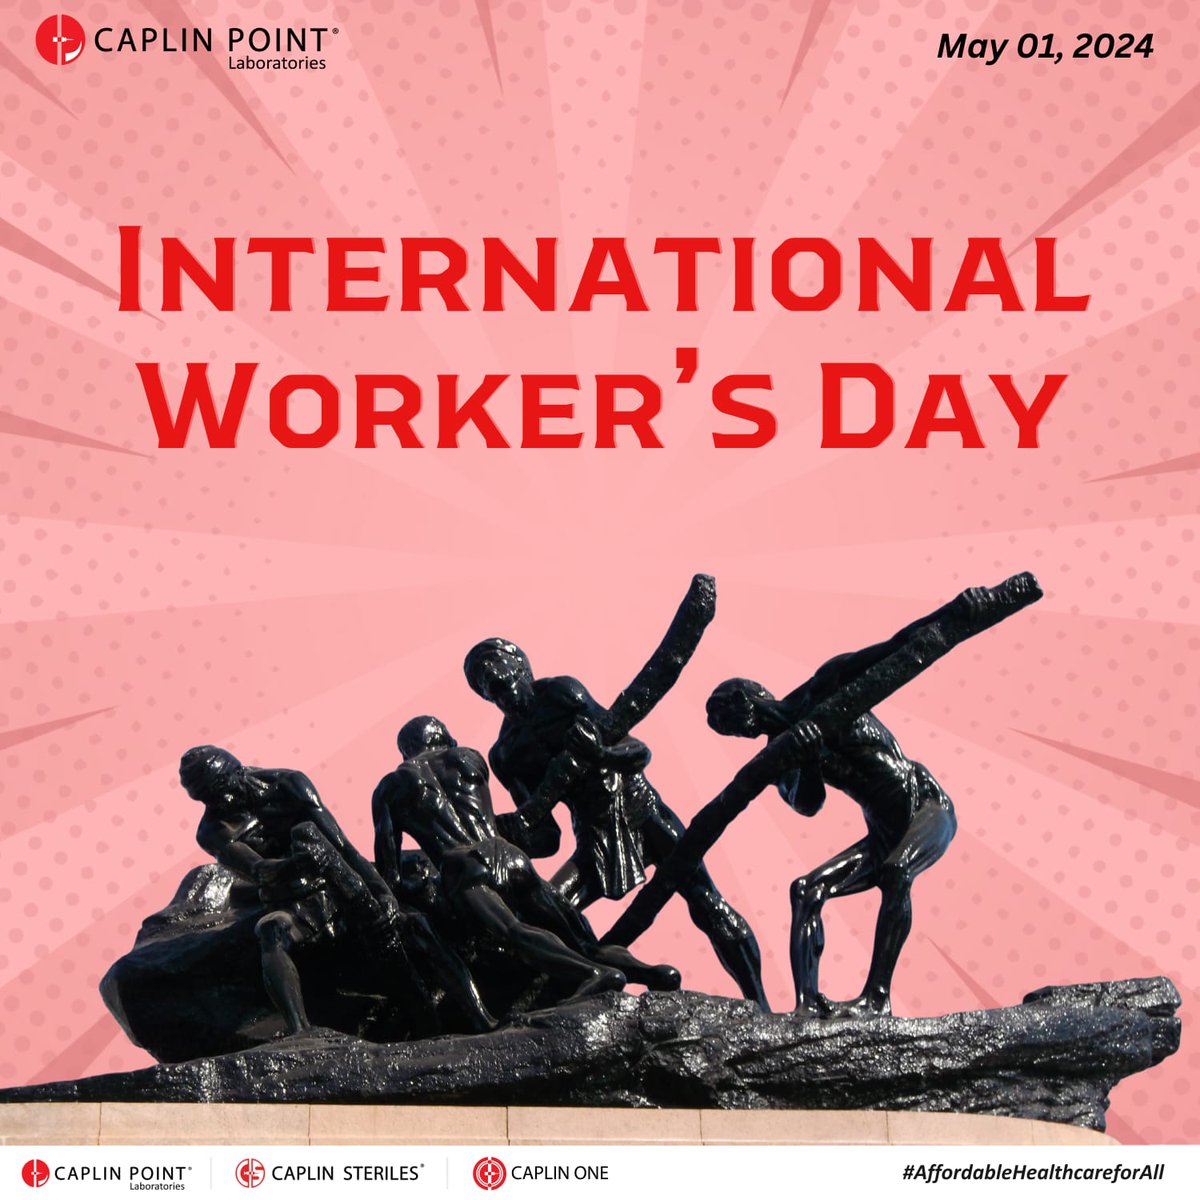 To all the hard-working professionals, your commitment, effort and passion make all the difference. Happy International Worker's Day.

#caplinpointlaboratories #caplinpoint #caplinsteriles #caplinonelabs #caplinone #sterilemanufacturing #pharmamanufacturing #injectables…